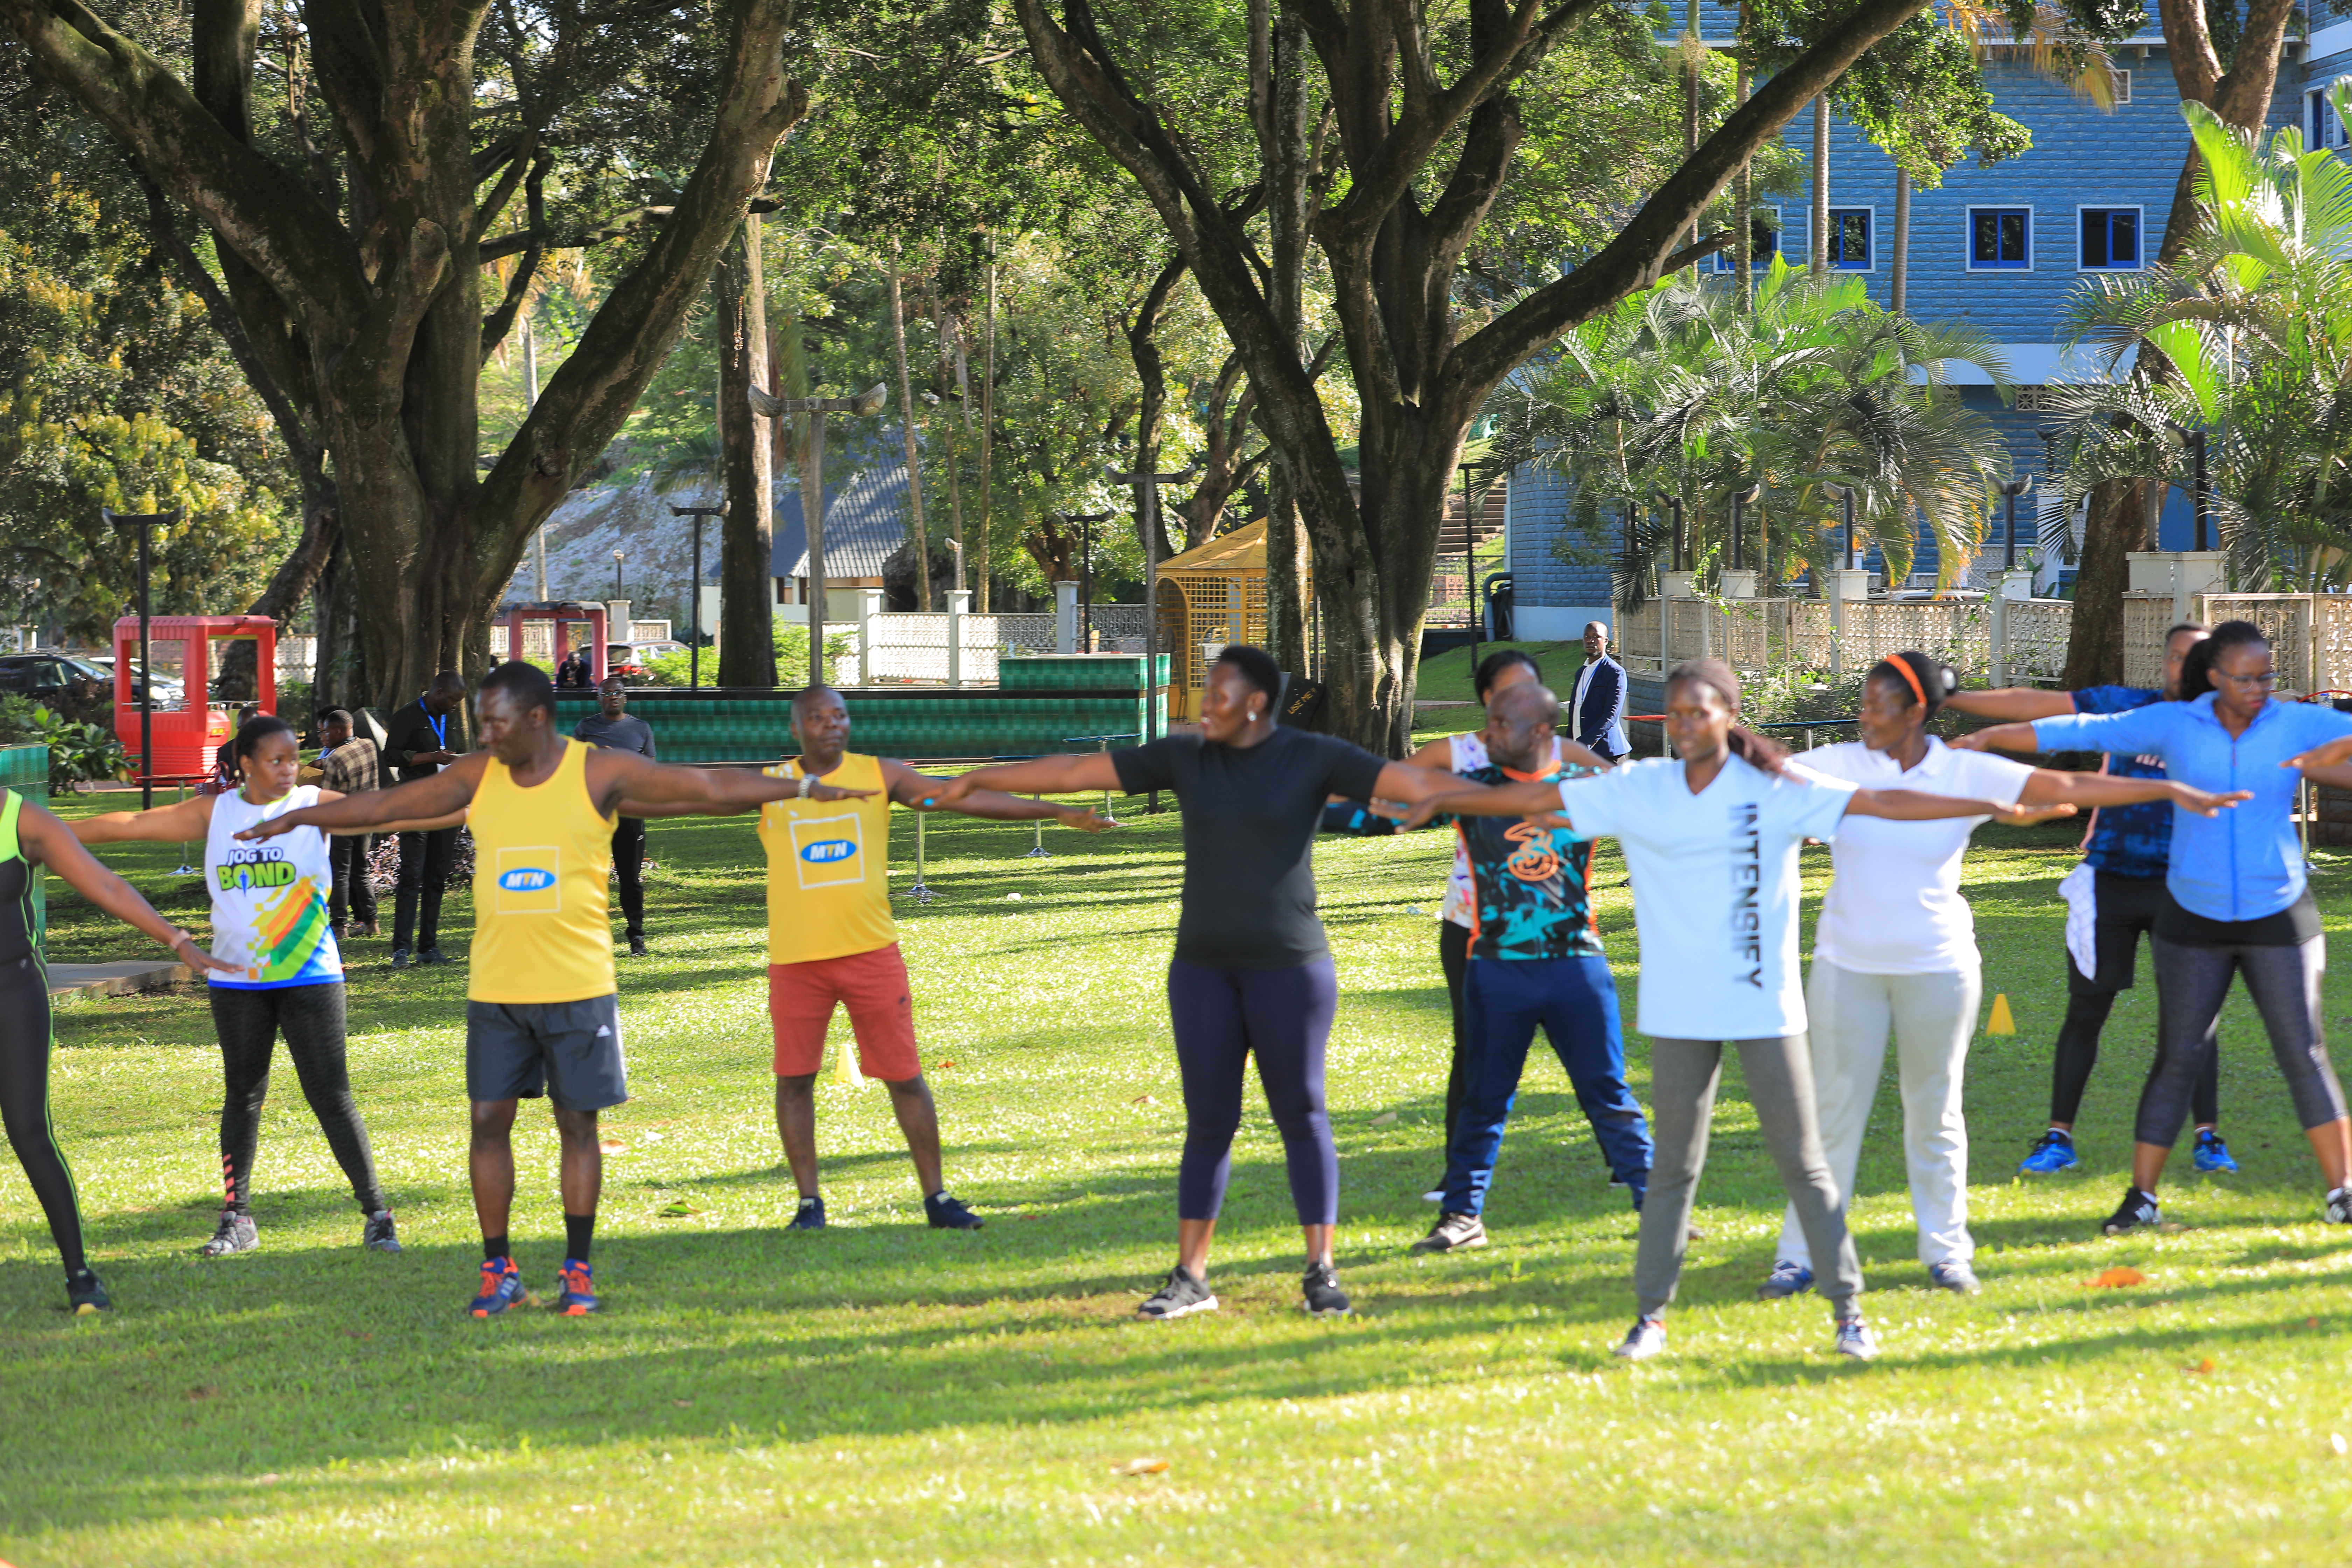 Participants embracing the burn during corporate exercises.